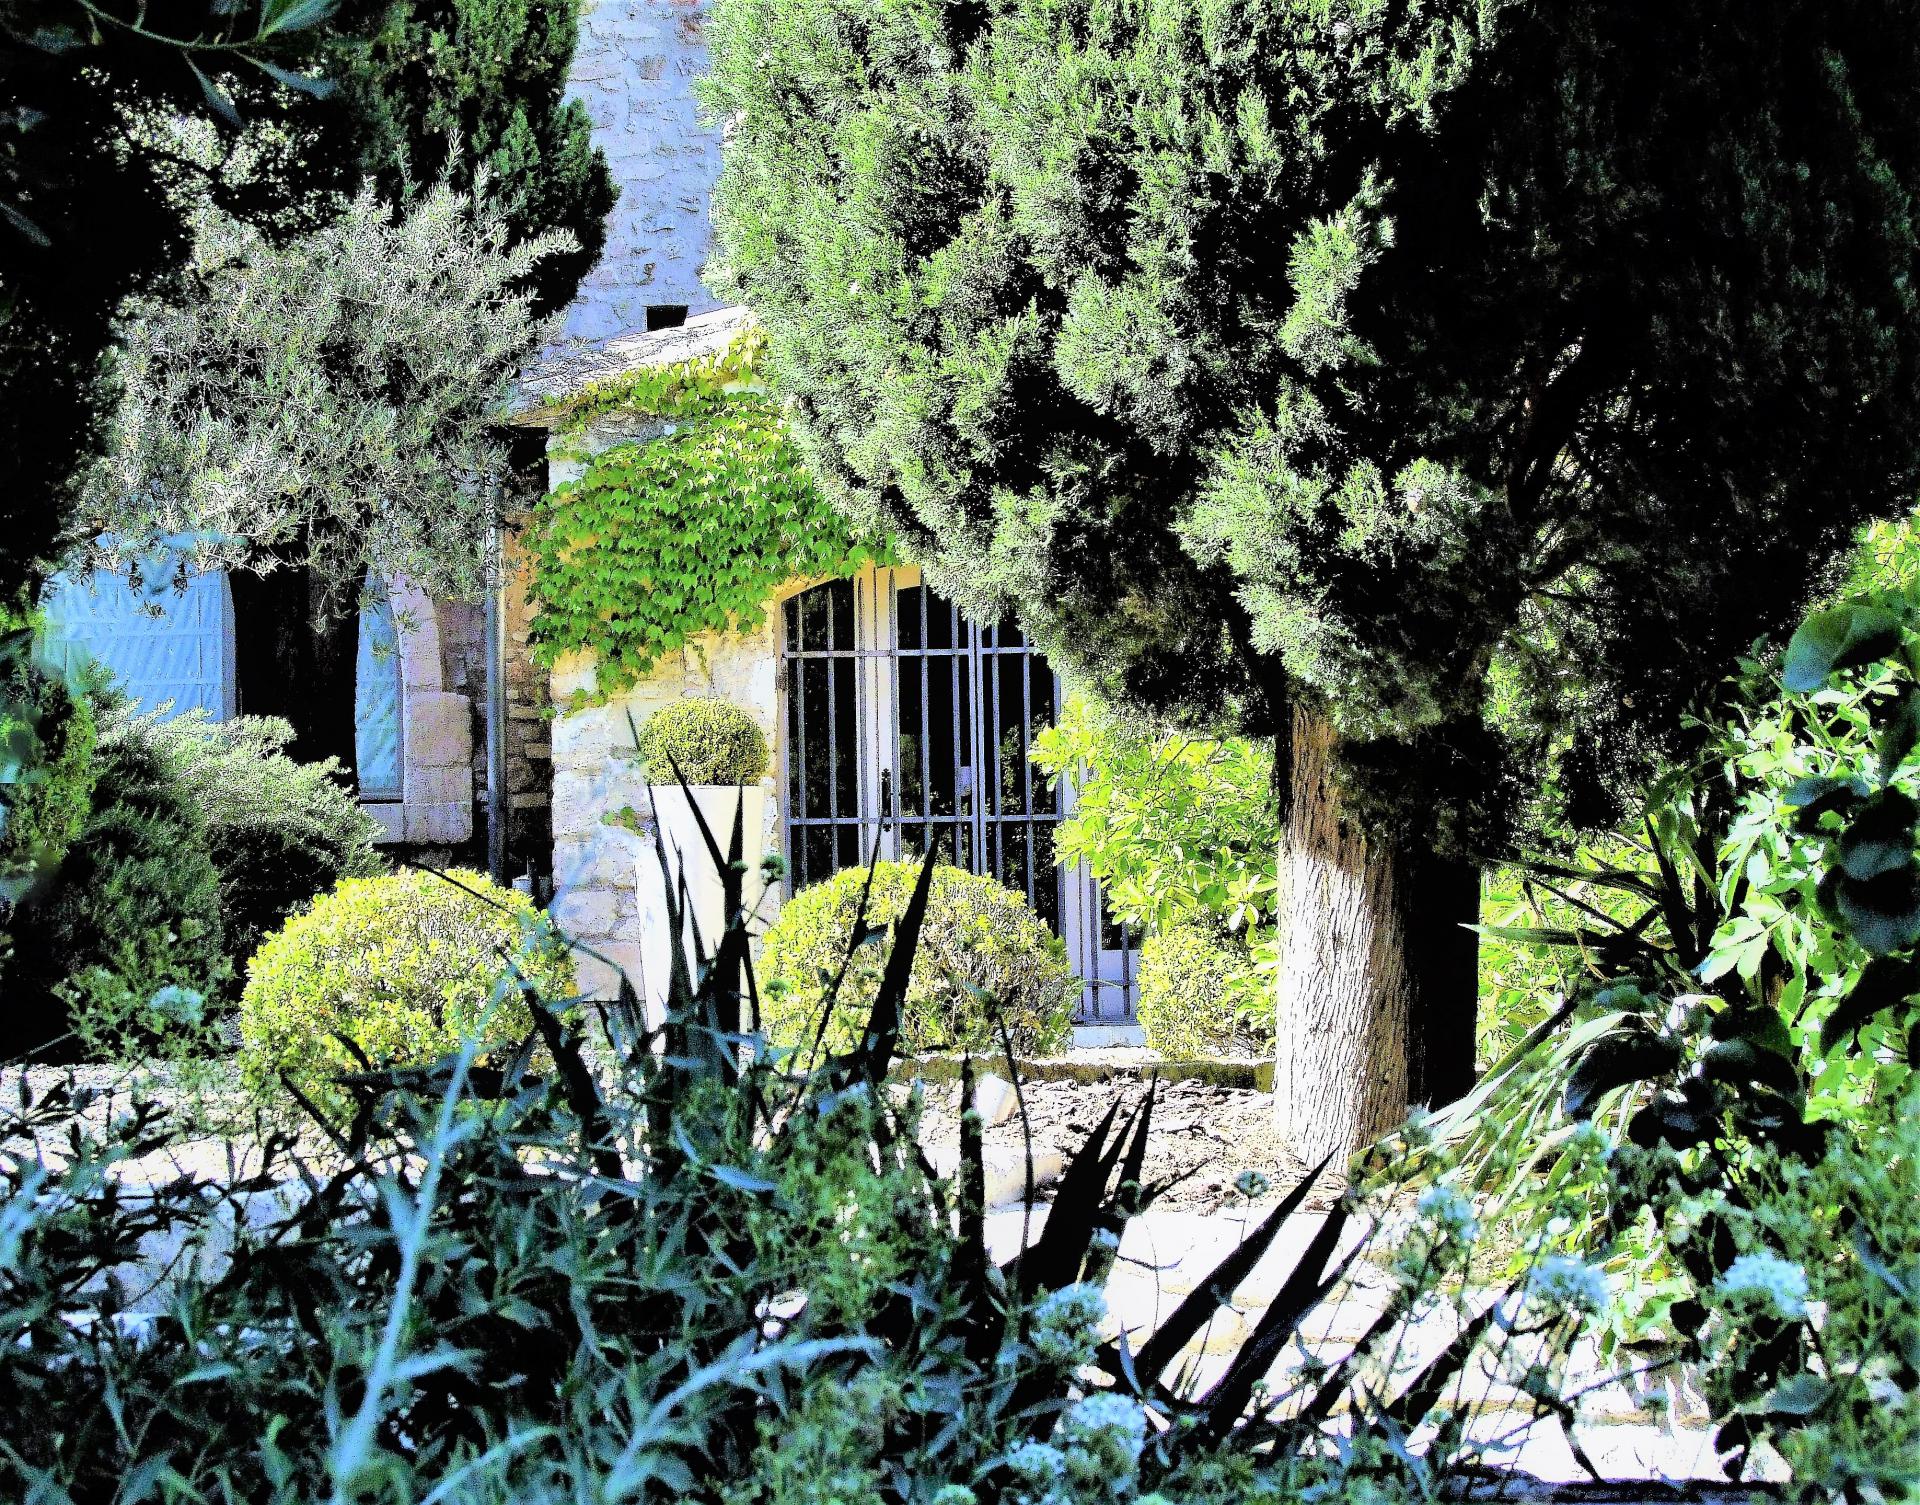 ENTRANCE TO A LUXURY VILLA RENTAL IN PROVENCE